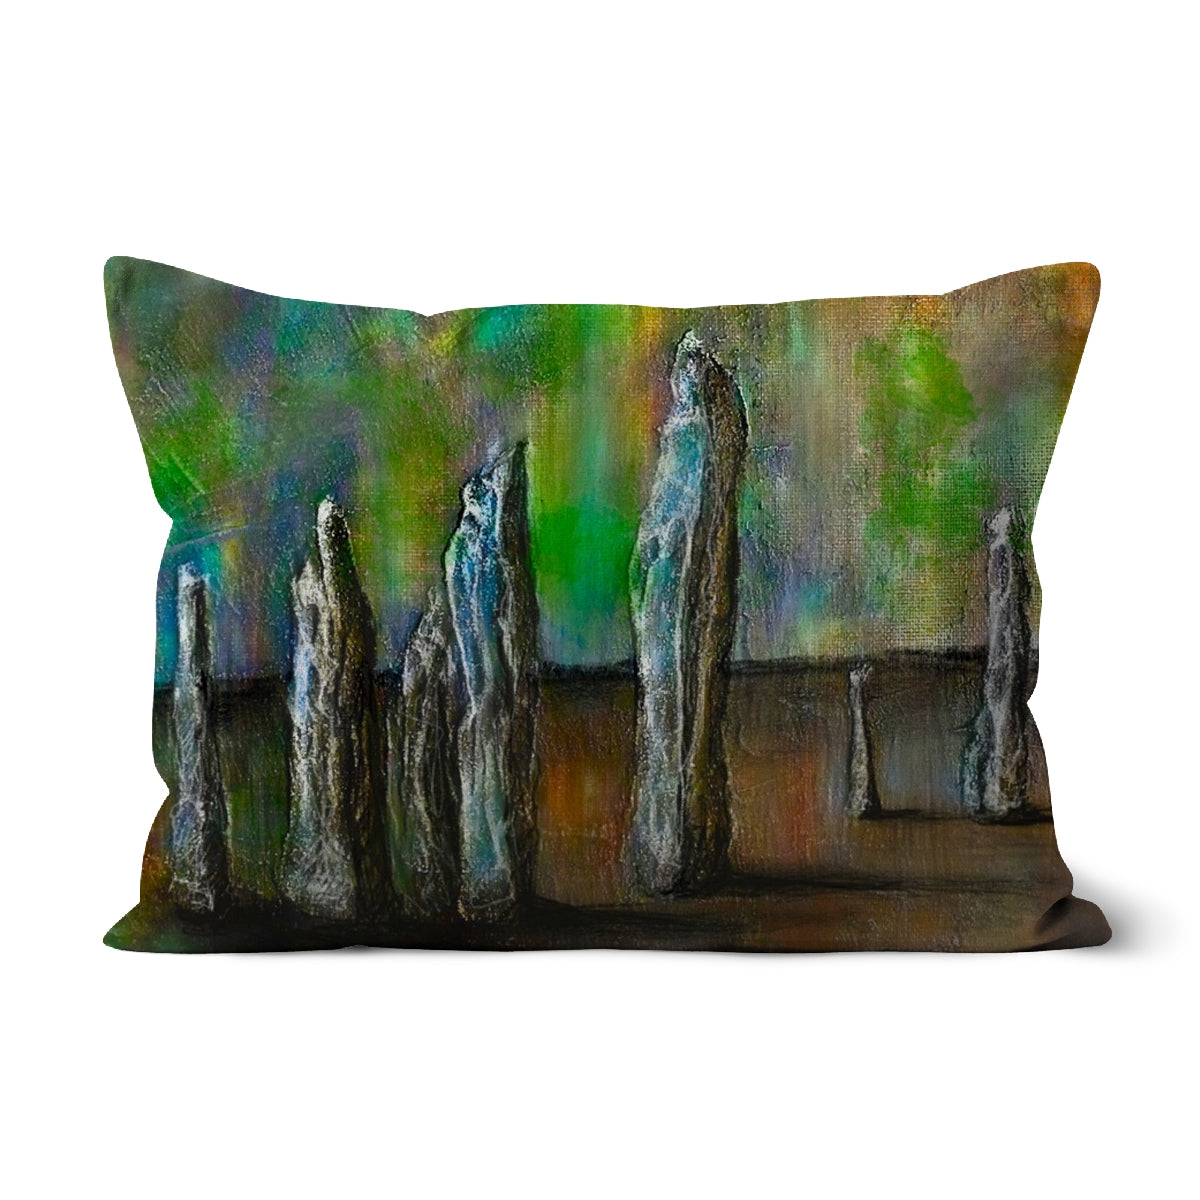 Callanish Northern Lights Art Gifts Cushion-Cushions-Hebridean Islands Art Gallery-Faux Suede-19"x13"-Paintings, Prints, Homeware, Art Gifts From Scotland By Scottish Artist Kevin Hunter